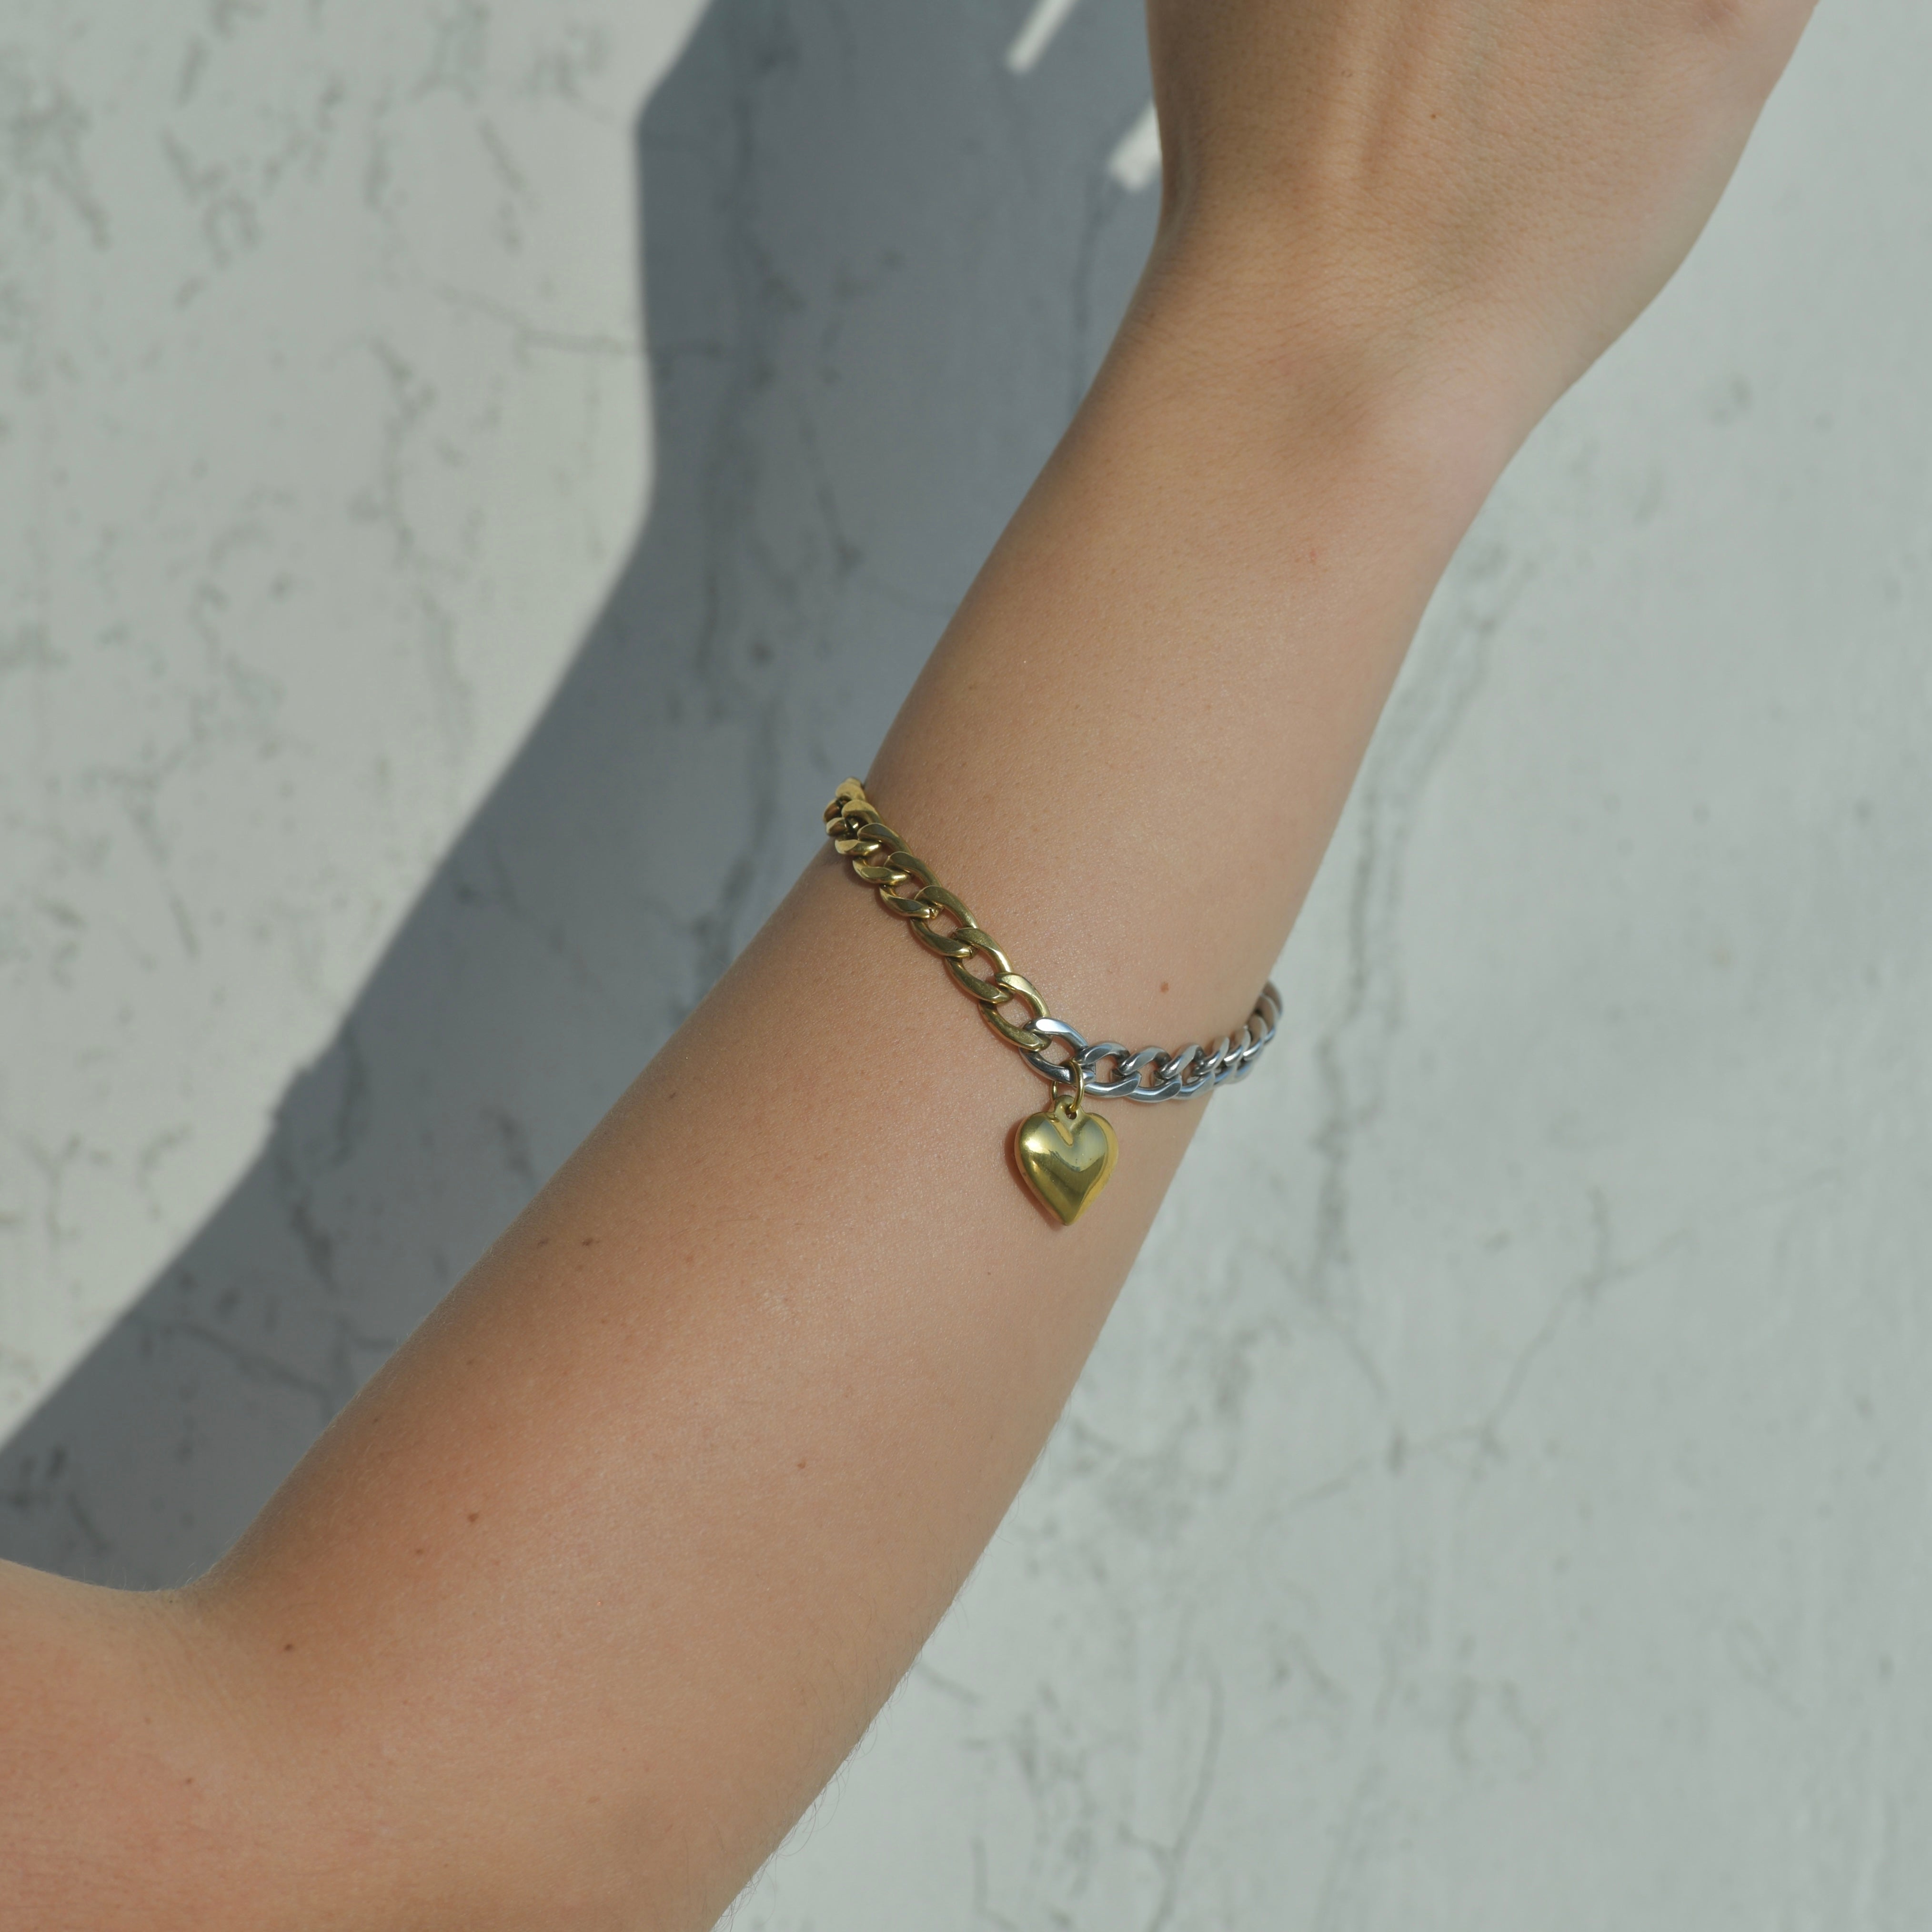 Cuban chain bracelet. Half gold and half silver with a gold heart pendant in the middle of the bracelet.